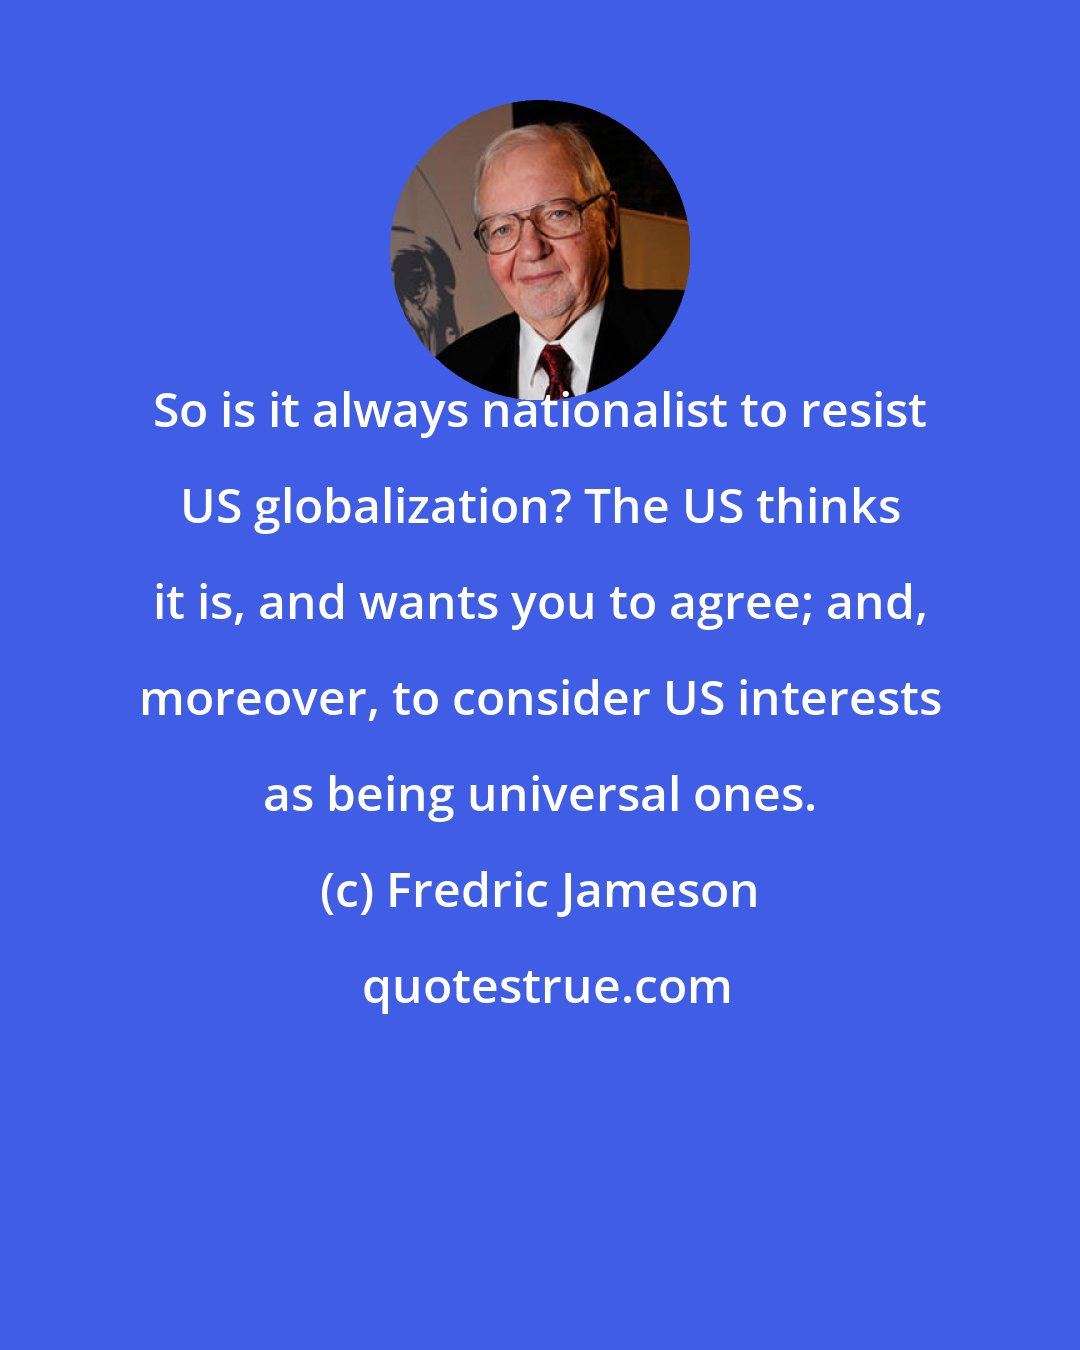 Fredric Jameson: So is it always nationalist to resist US globalization? The US thinks it is, and wants you to agree; and, moreover, to consider US interests as being universal ones.